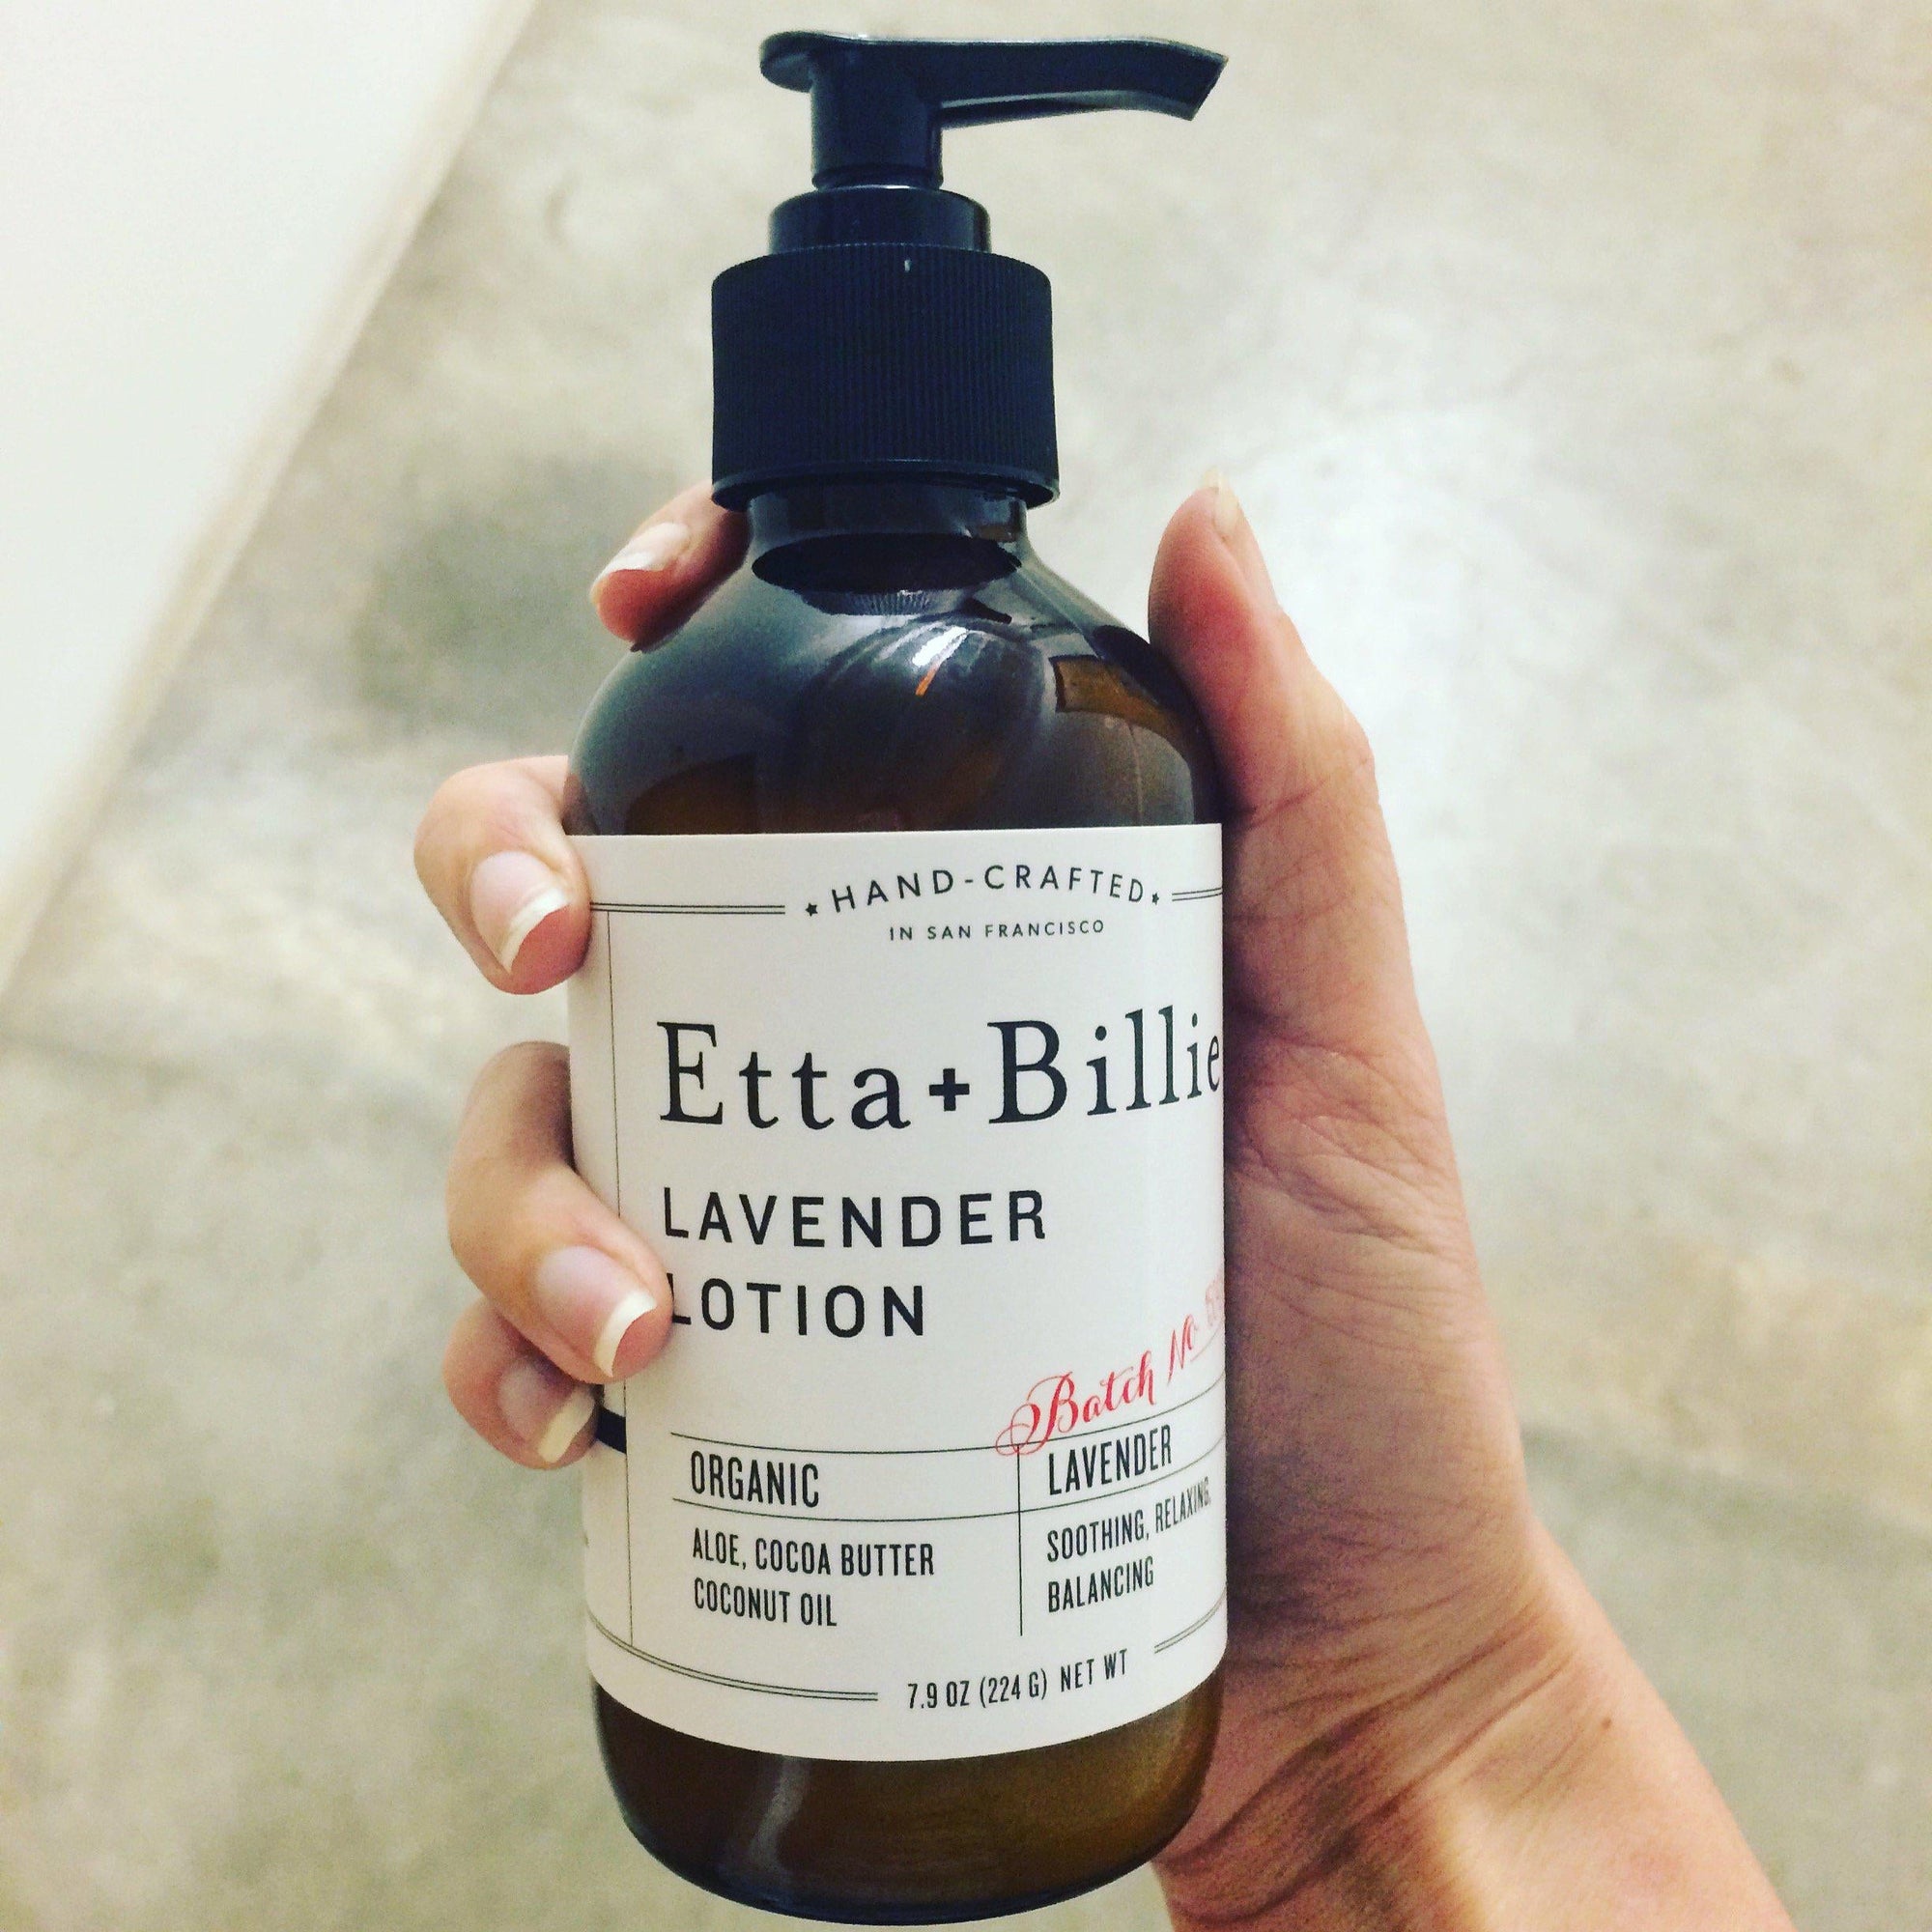 Soothe Your Sunburn with Etta + Bille Lavender Lotion